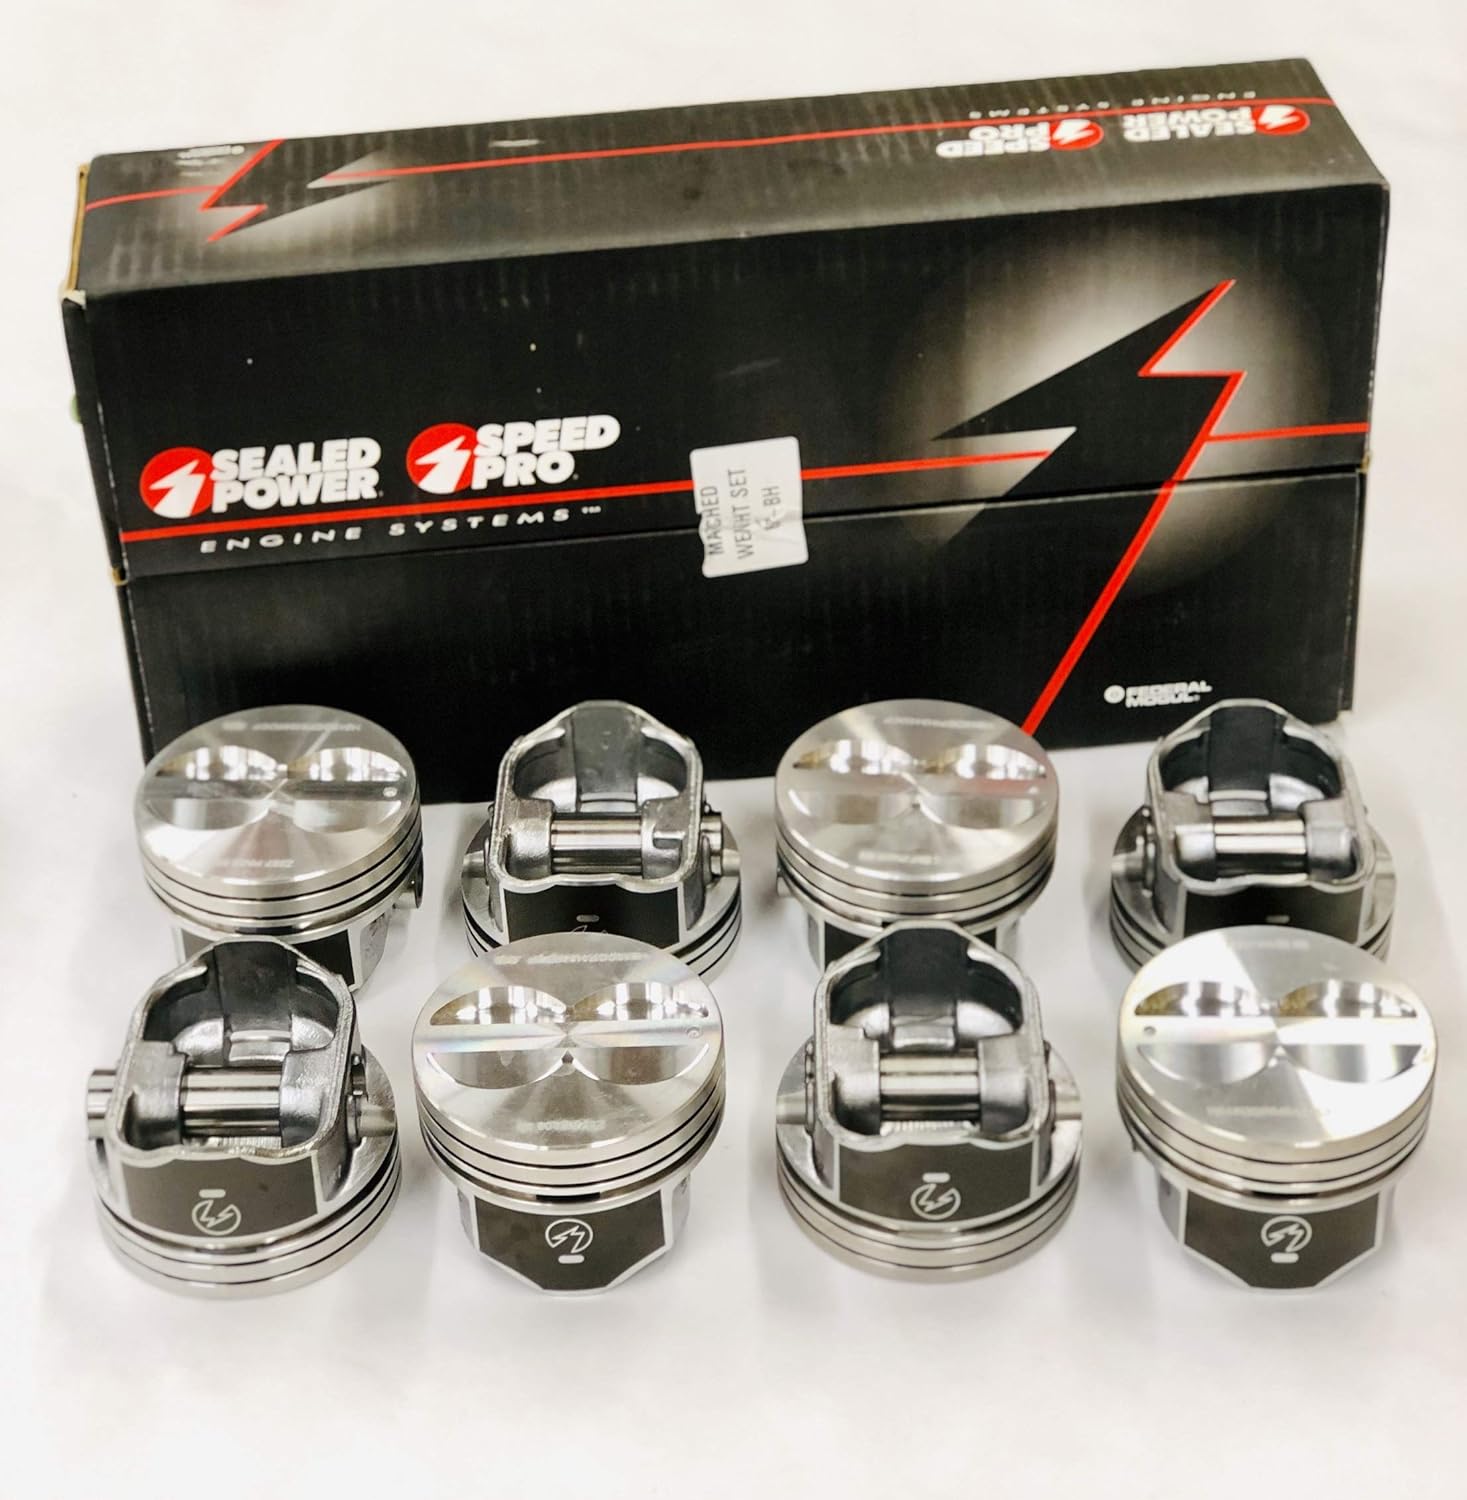 Speed Pro H345DCP 350 Small Block Chevy SBC Flat Top Pistons Coated Piston 5.7L Engine. For Standard 4.00" Bore Diameter. - image 1 of 1